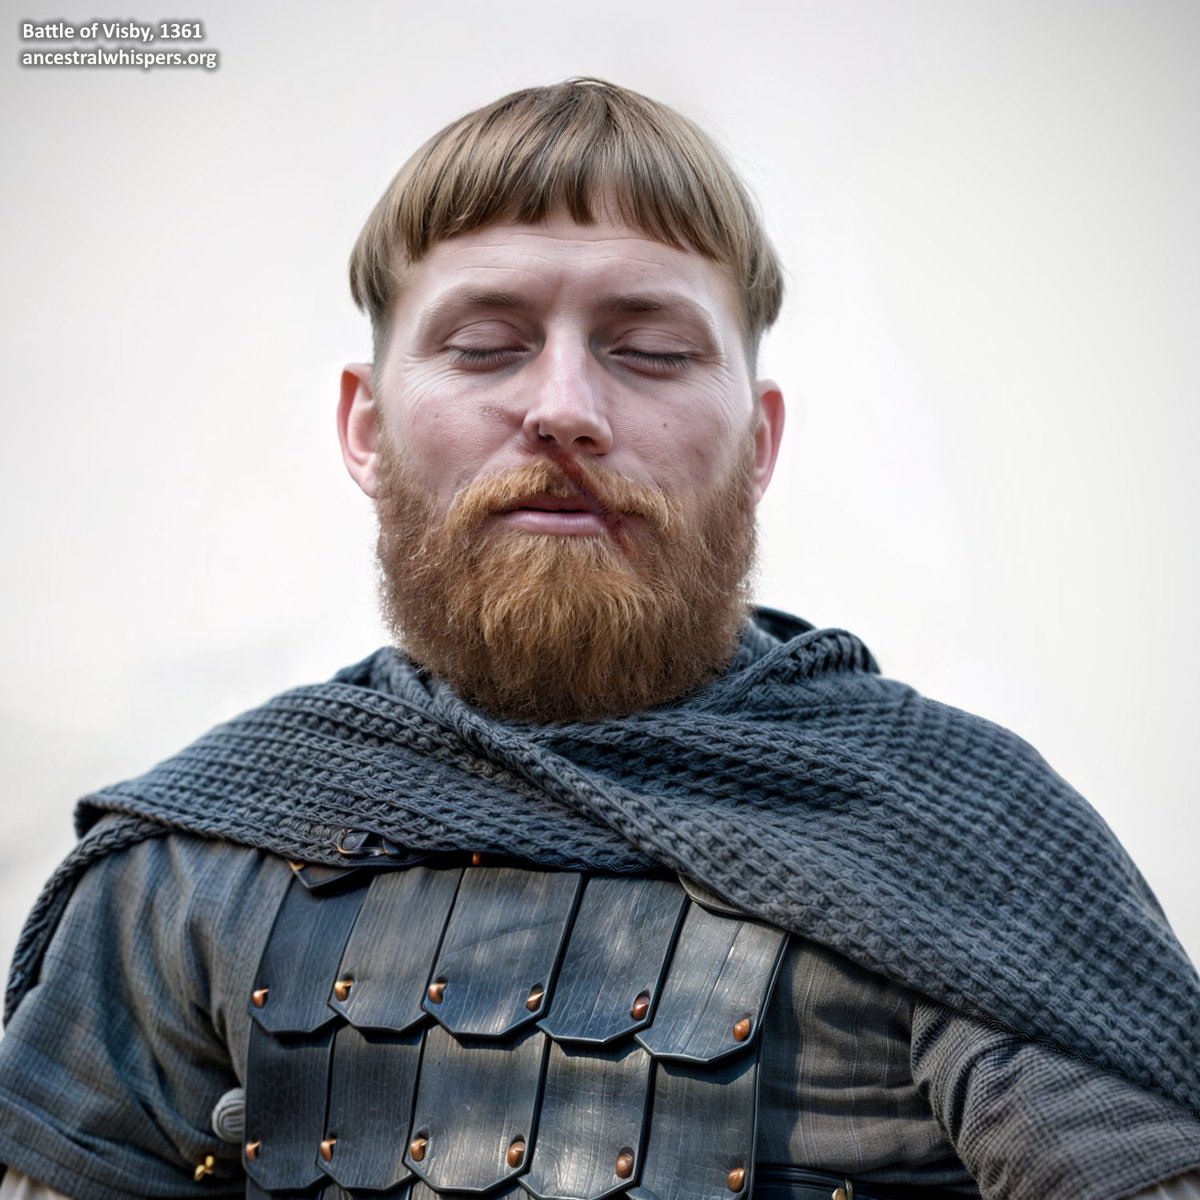 Facial reconstruction of a participant from the 14th century Battle of Visby, Gotland, Sweden.